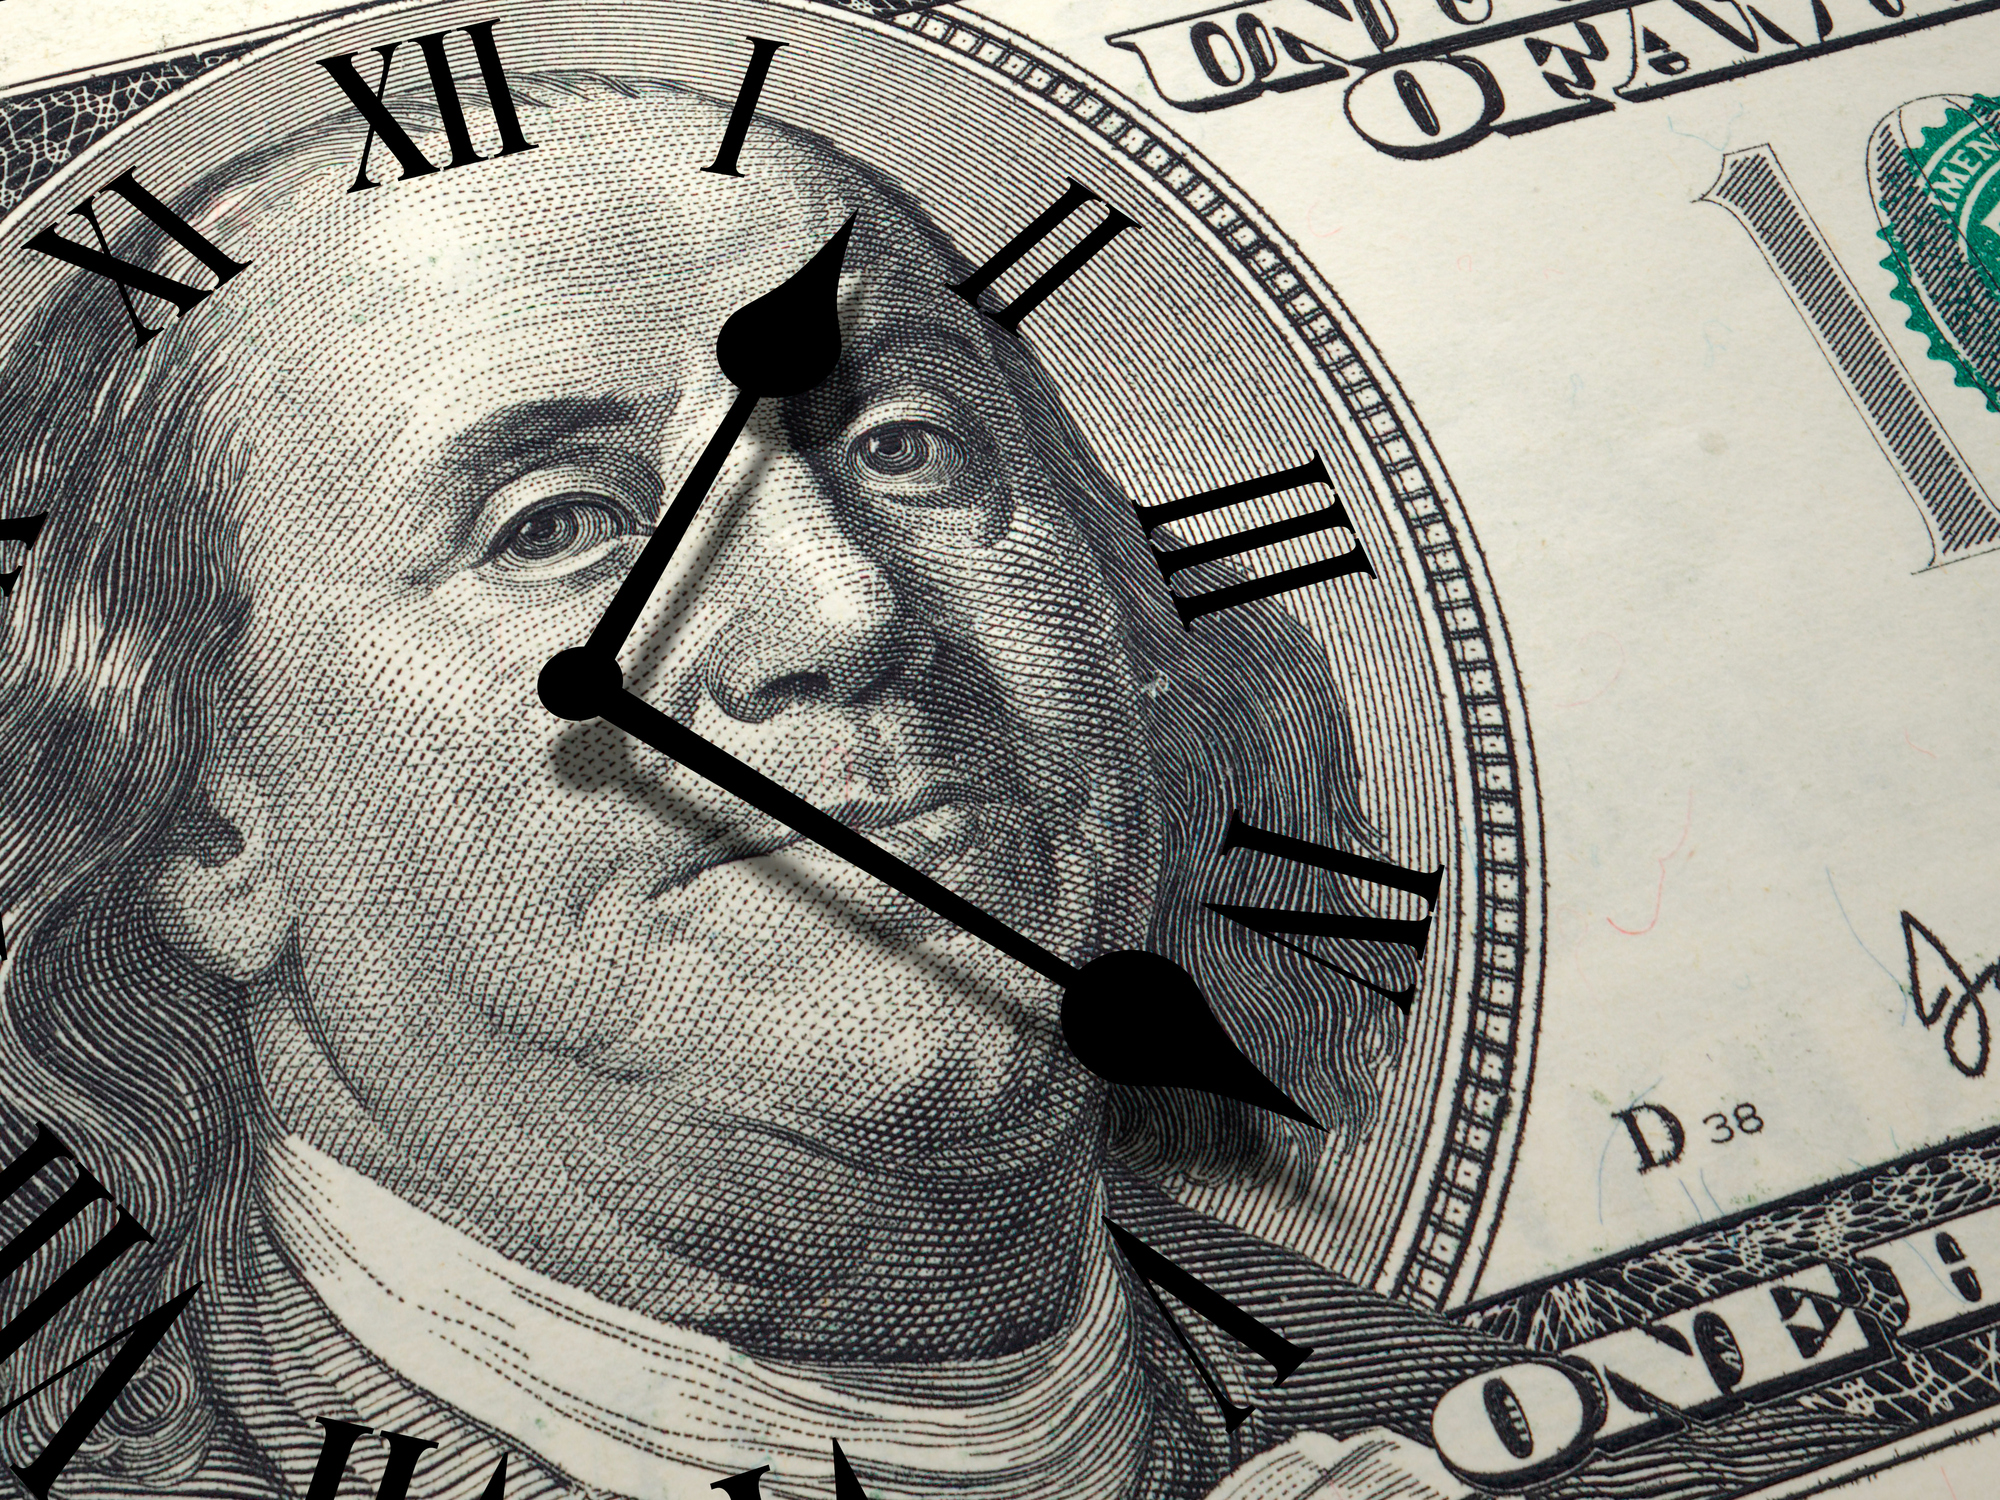 Time is money concept with one hundred dollars note and clock face on it.